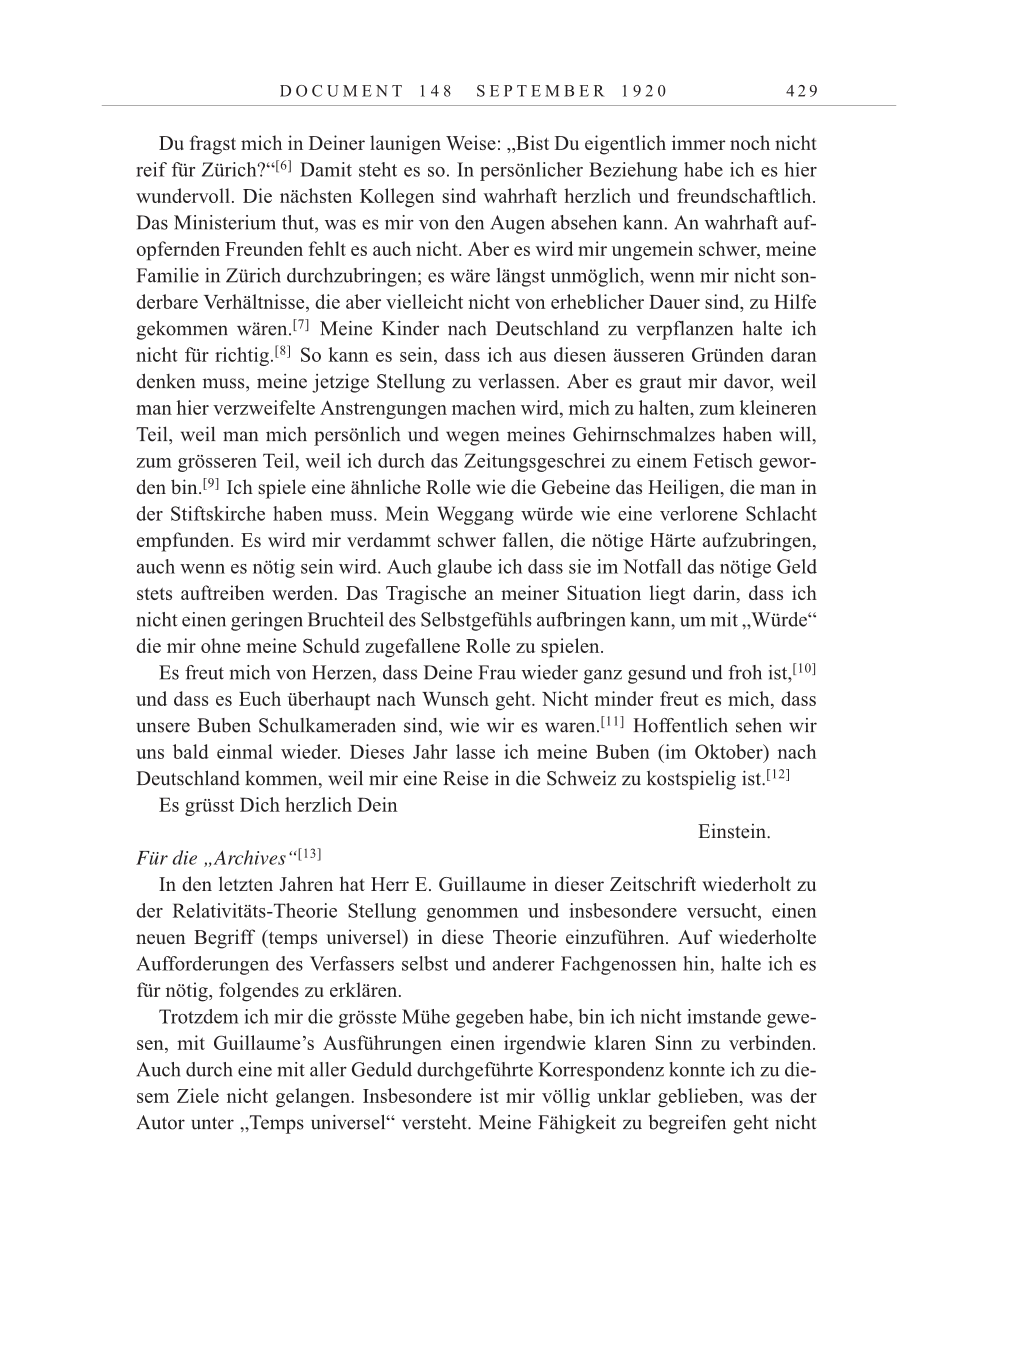 Volume 10: The Berlin Years: Correspondence May-December 1920 / Supplementary Correspondence 1909-1920 page 429